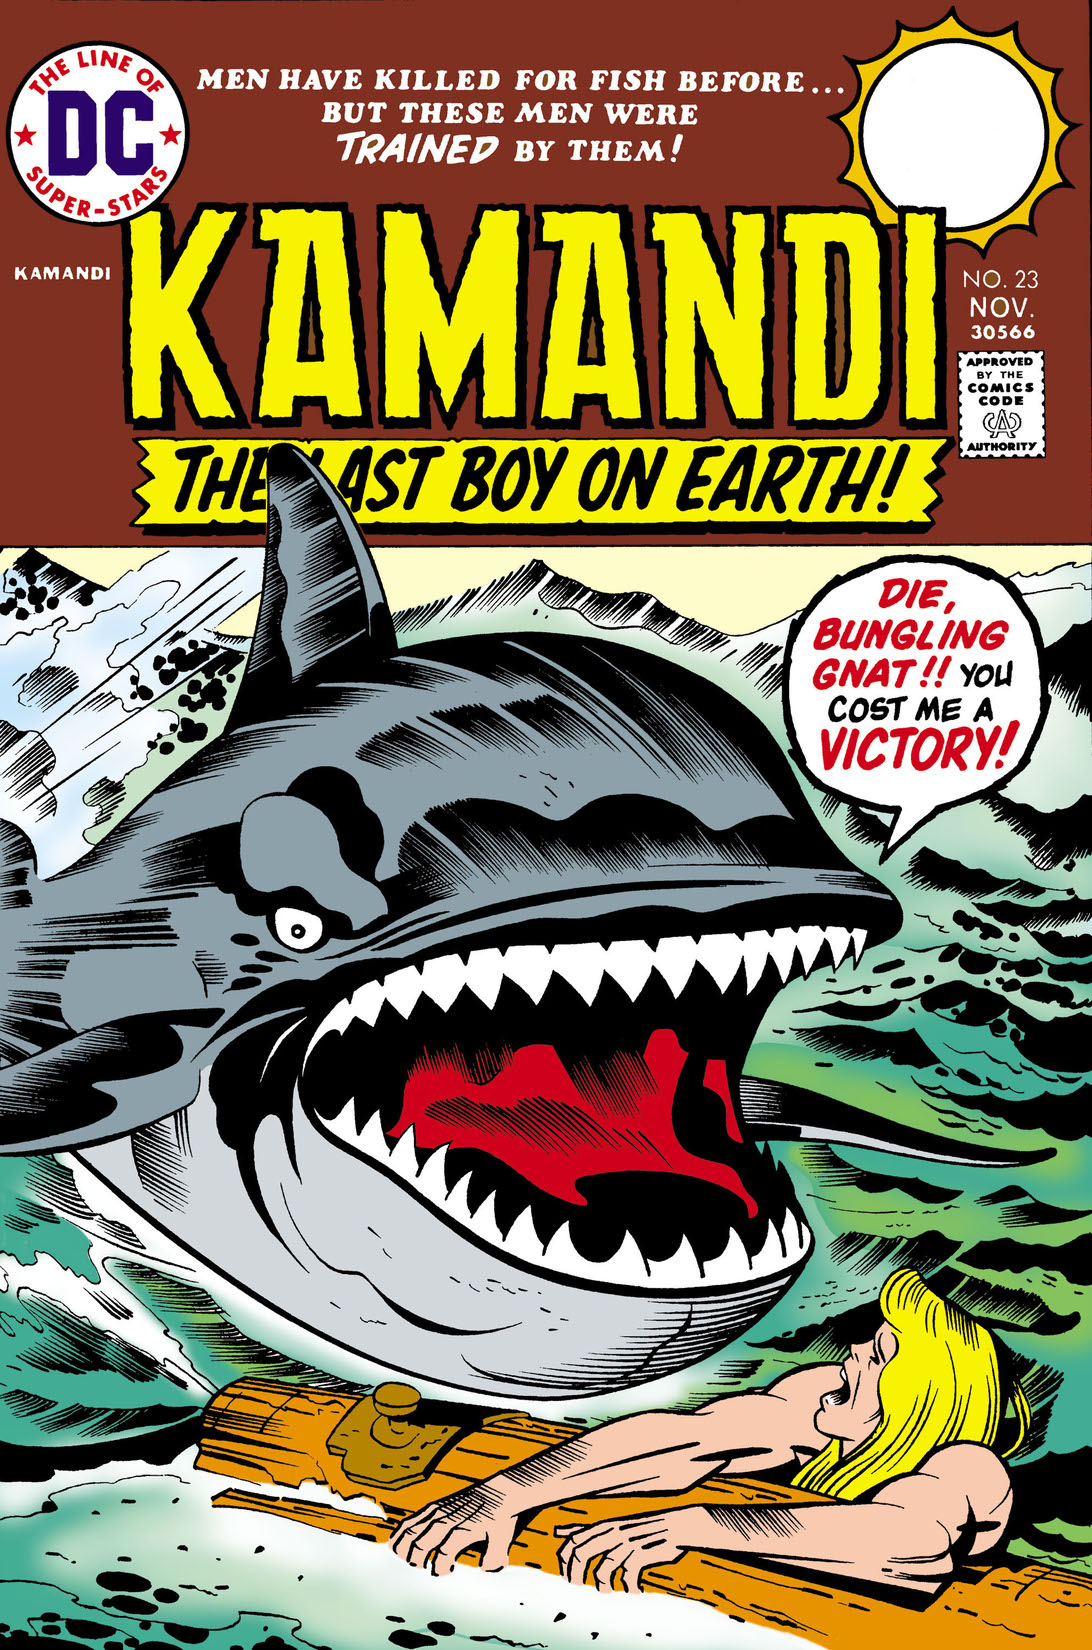 Kamandi: The Last Boy on Earth #23 preview images